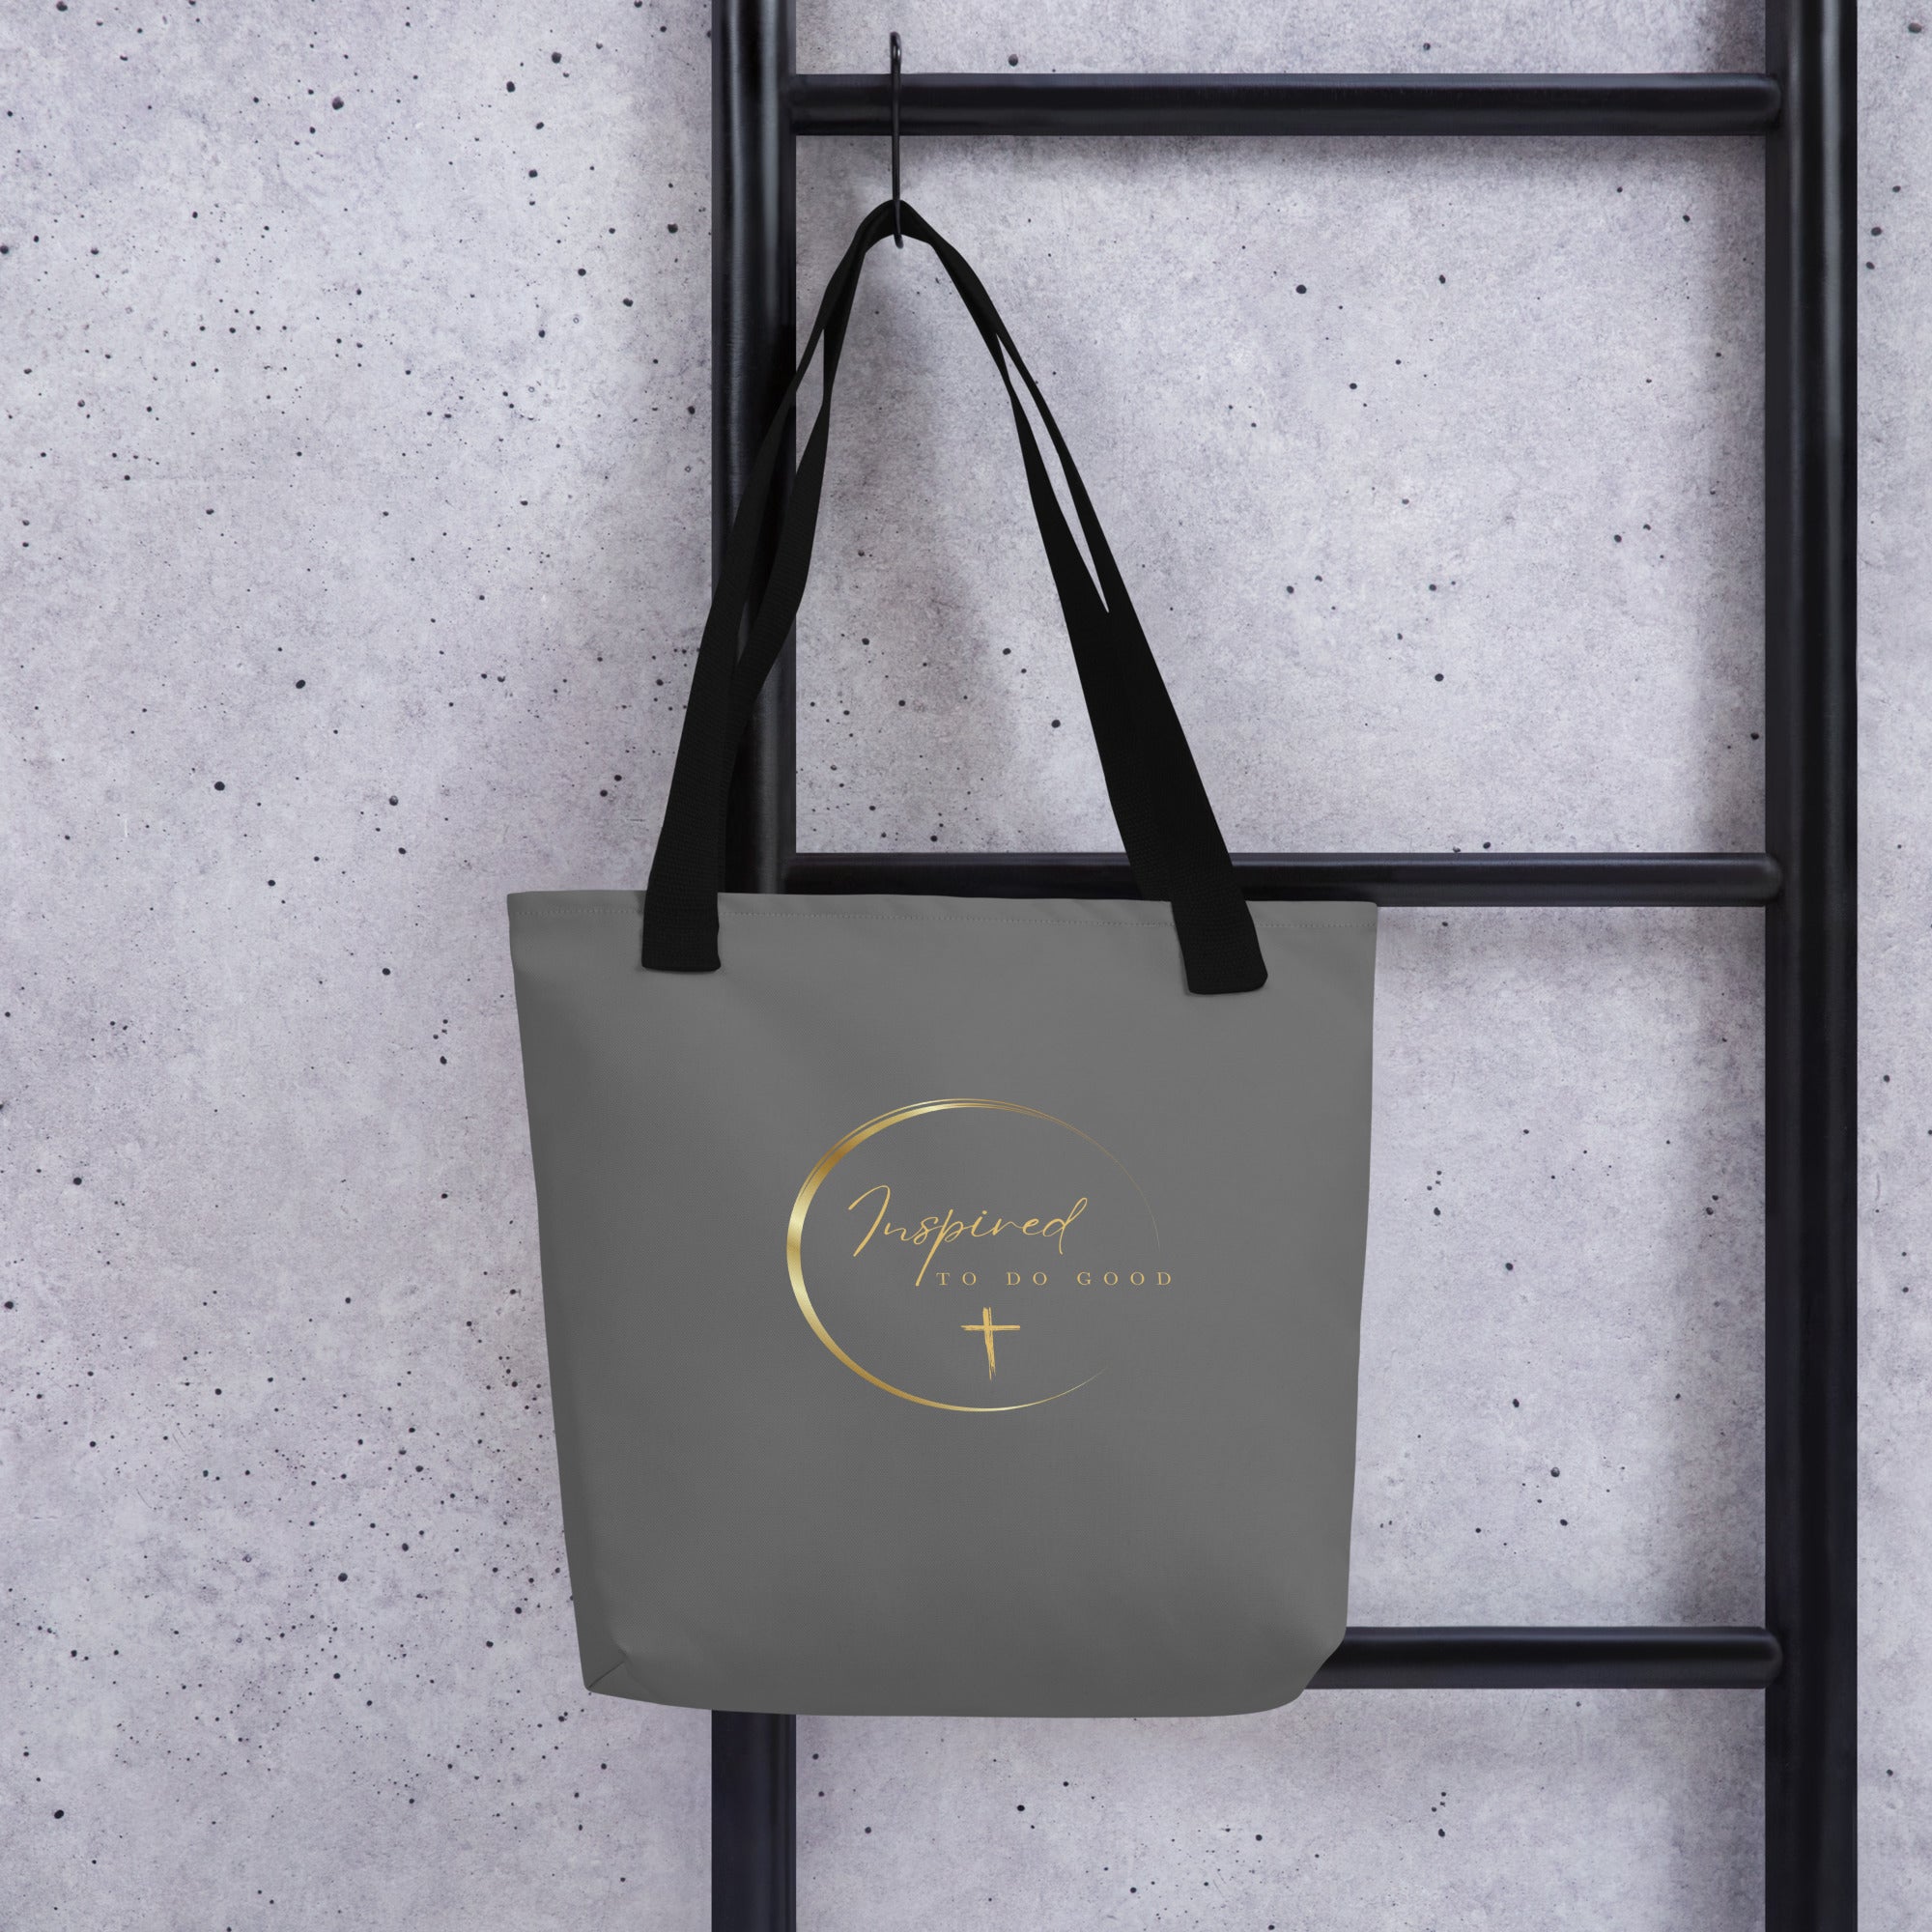 Inspired to do good tote bag - Gray